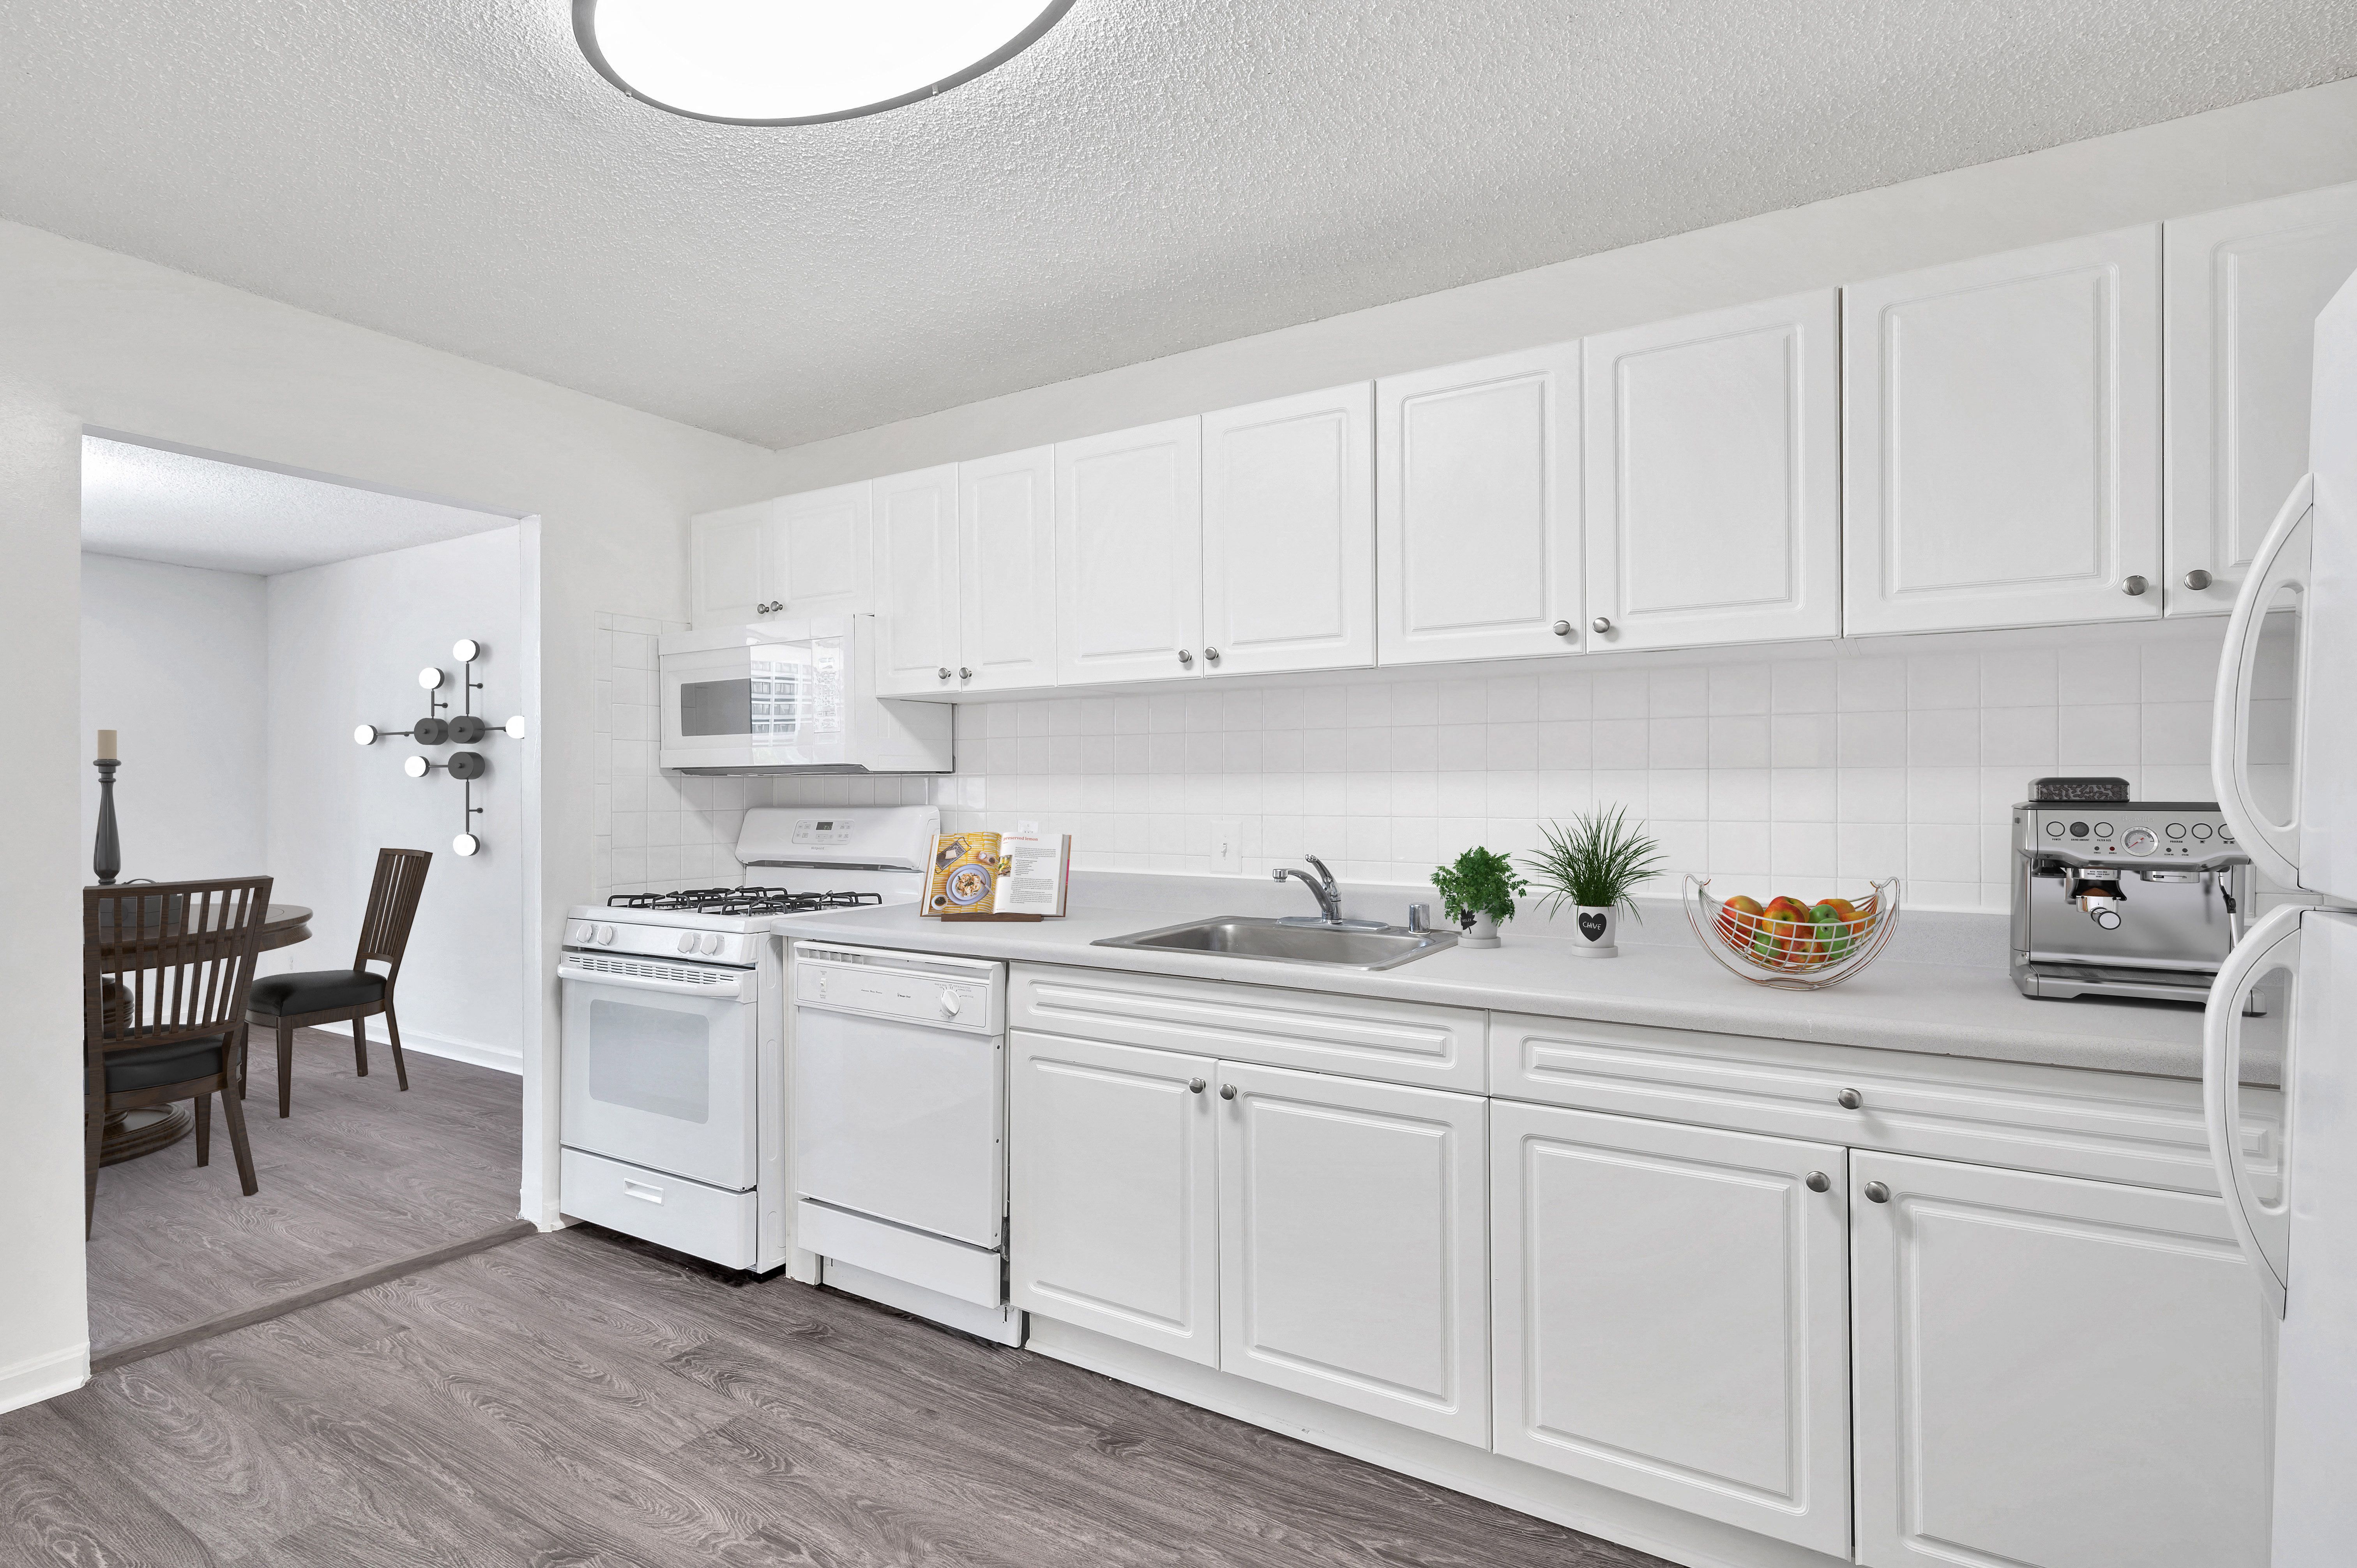 Spacious kitchens with white cabinetry